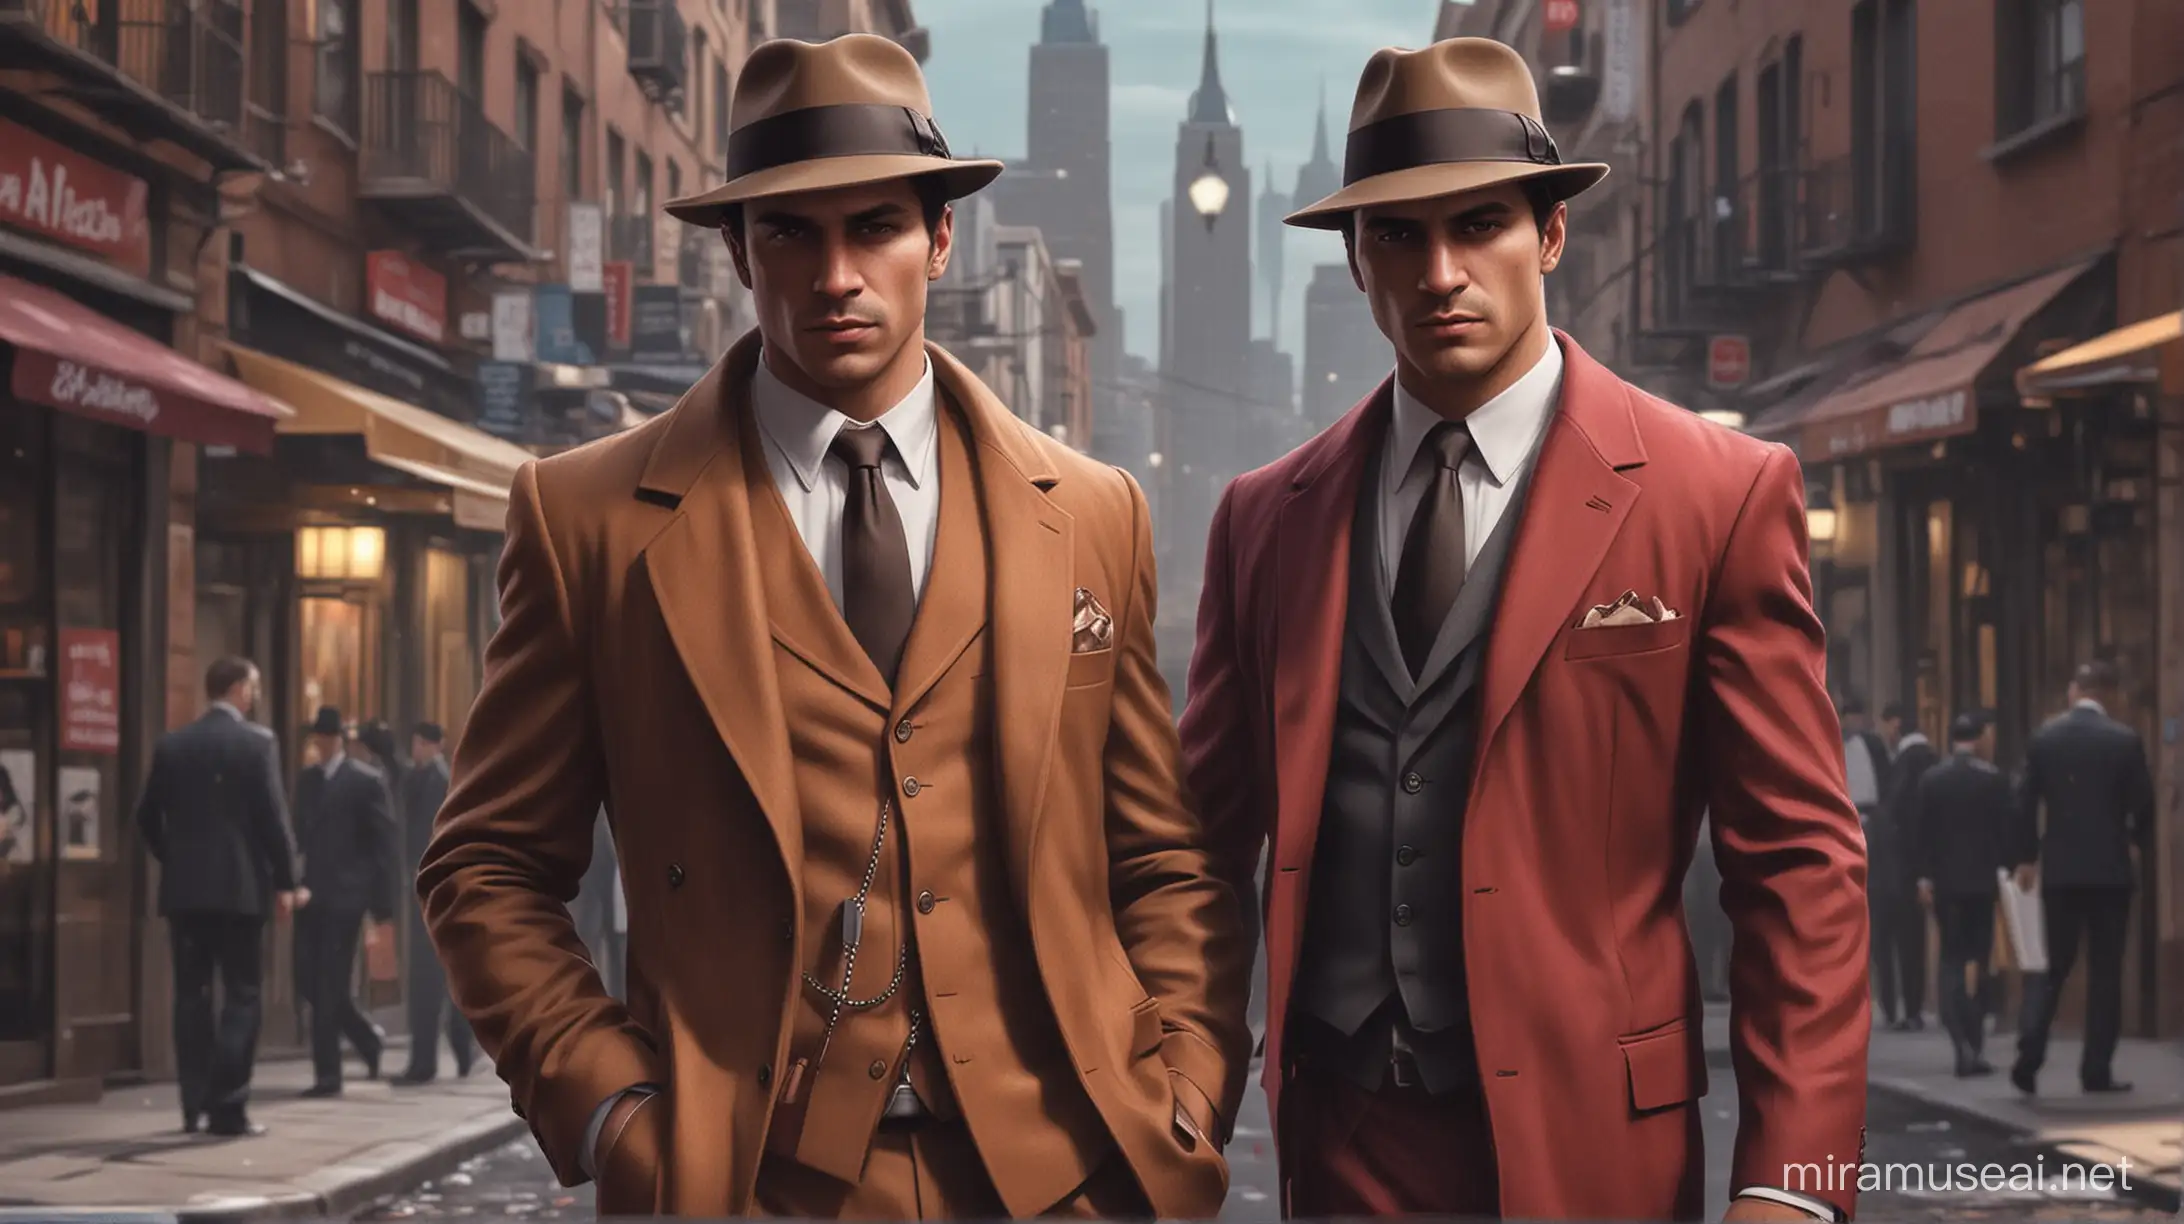 "Hi, I'd like you to draw me a picture related to a mafia game scenario. If possible, can you show a picture of a male investigator in a colored suit without a hat and holding a card with the name of the investigator walking around the area? Create a bright and attractive mafia city for me? This image will be very valuable to me. Thank you."